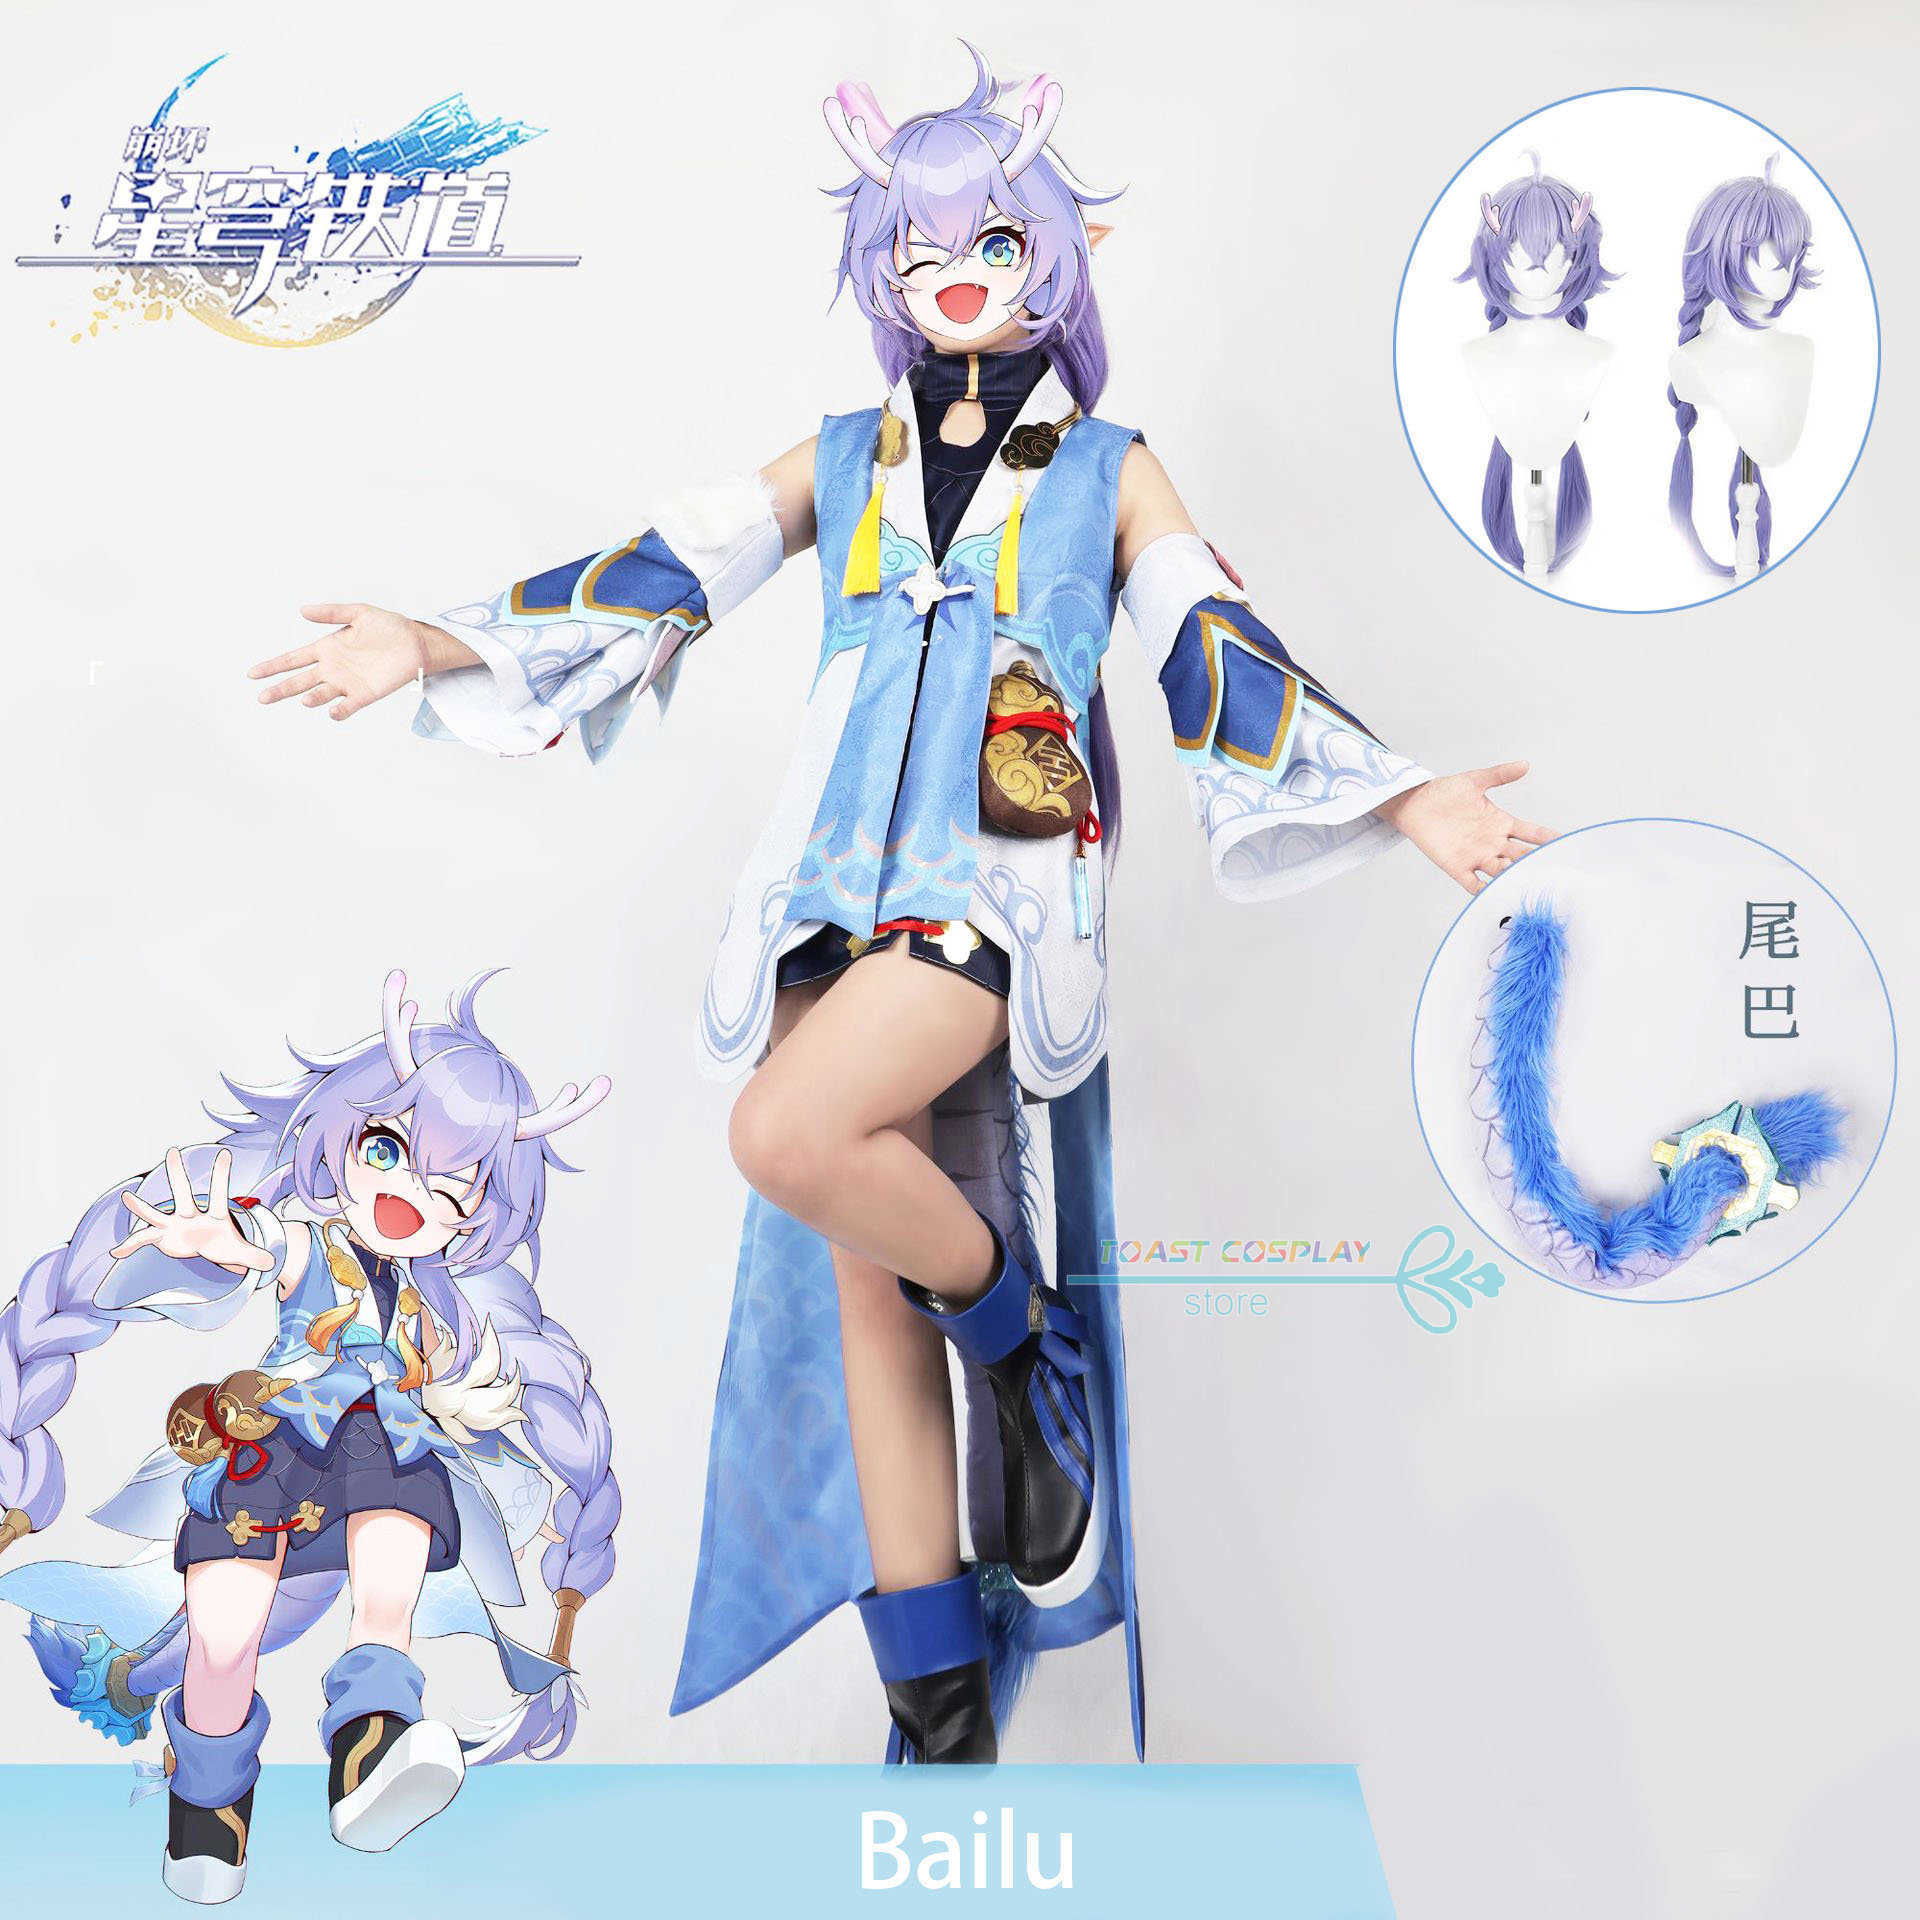 

Anime Costumes Game Honkai Star Rail Bailu Cosplay Come full Set With Textured Fabrics Accessories Bai Lu Cosplay Wig Outfit Z0602